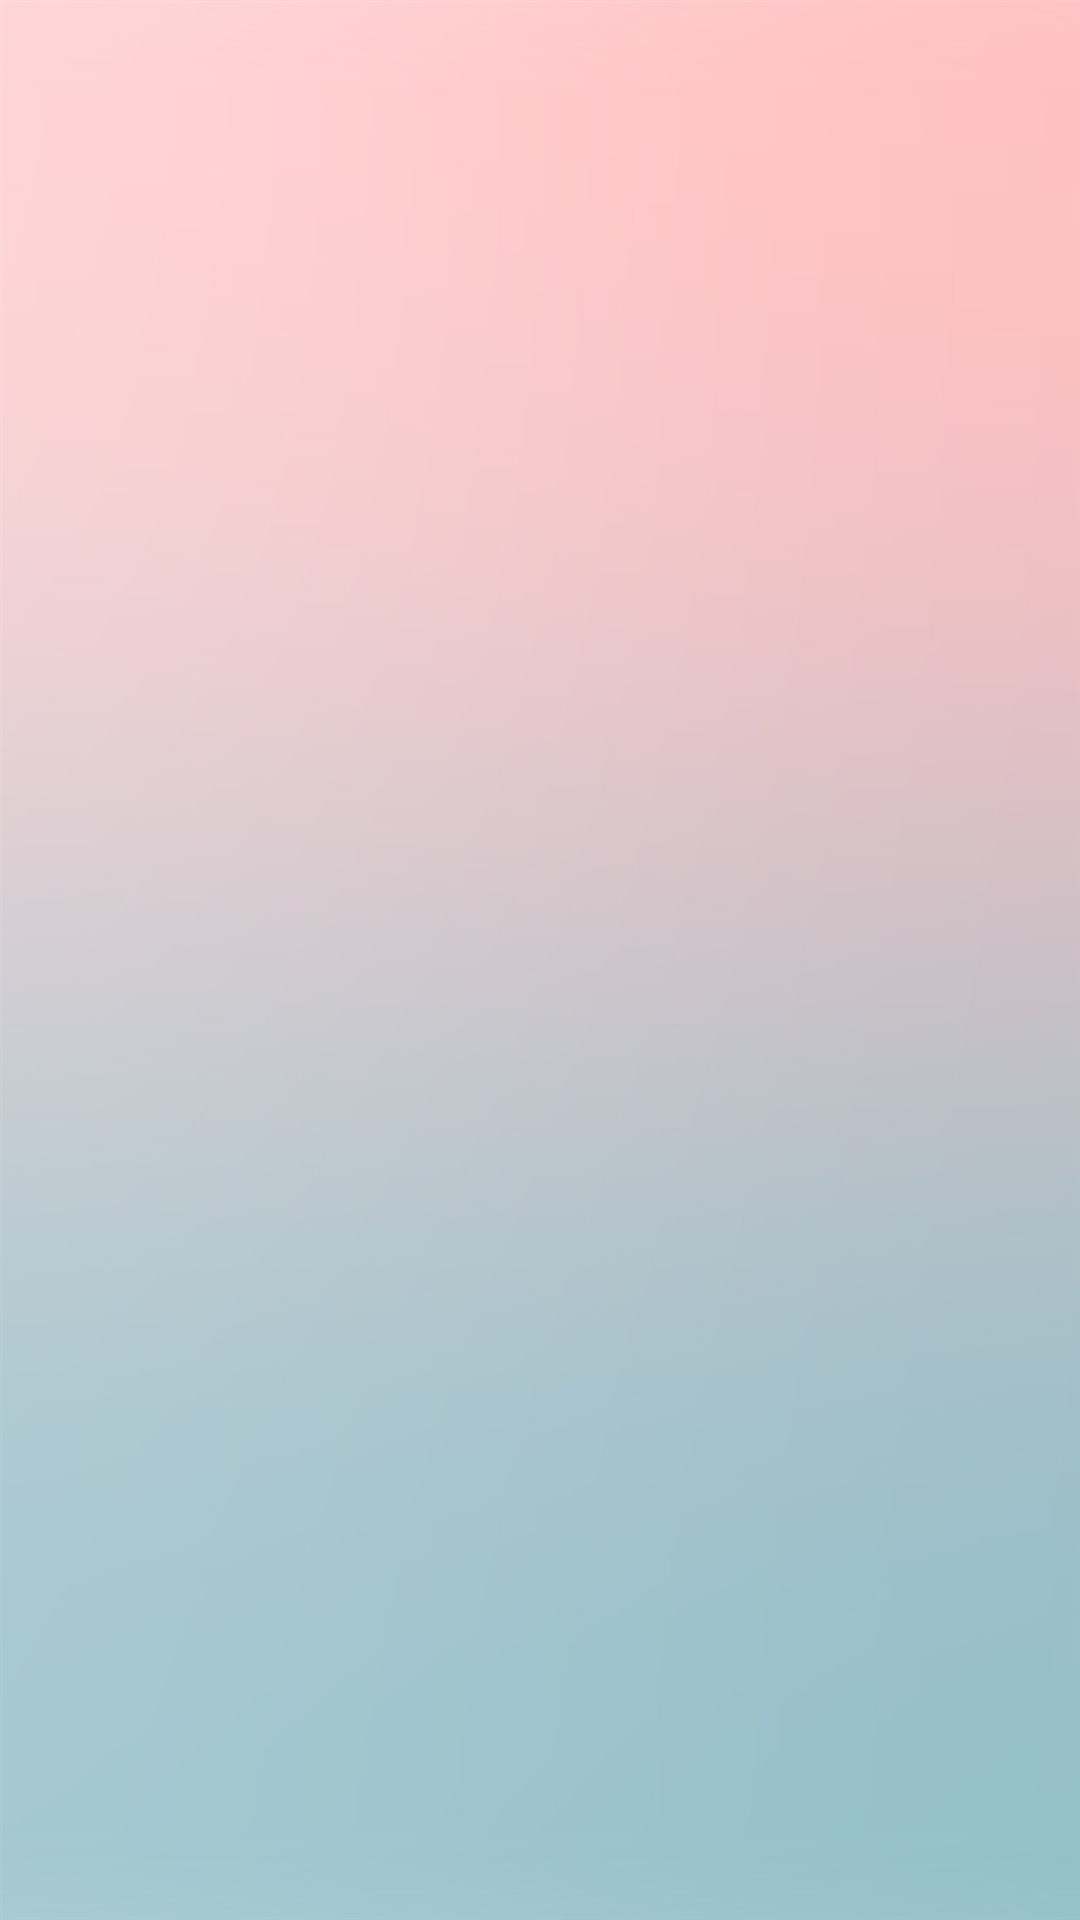 Pastel Blue And Pink - HD Wallpaper 